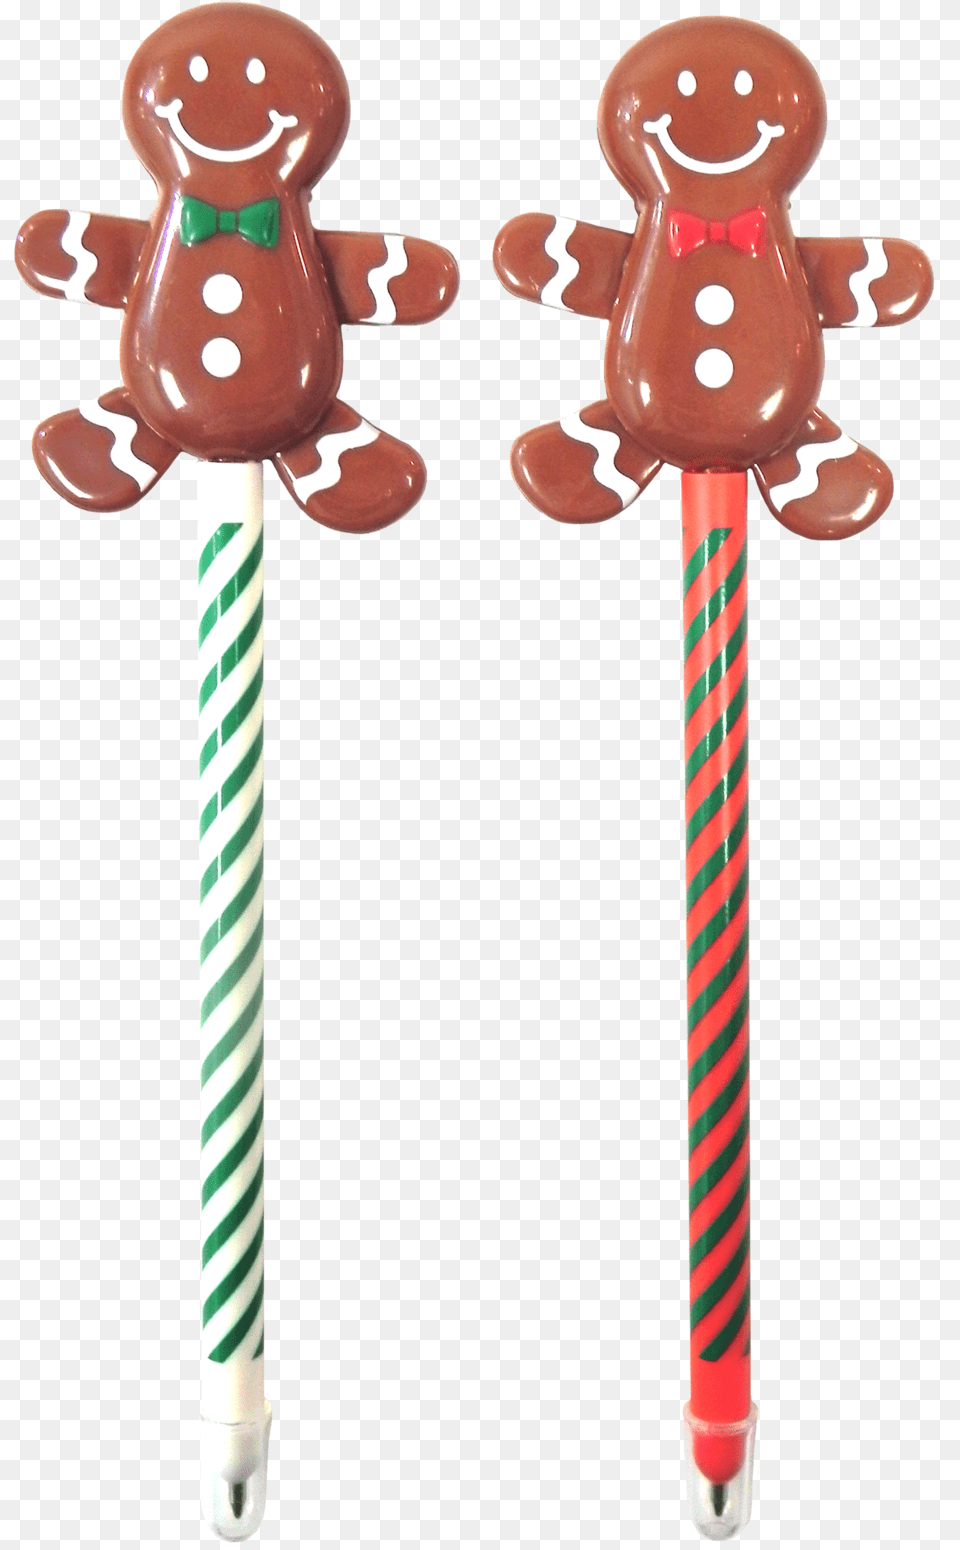 Gingerbread 2 Gingerbread Pen, Food, Sweets, Candy, Baby Png Image